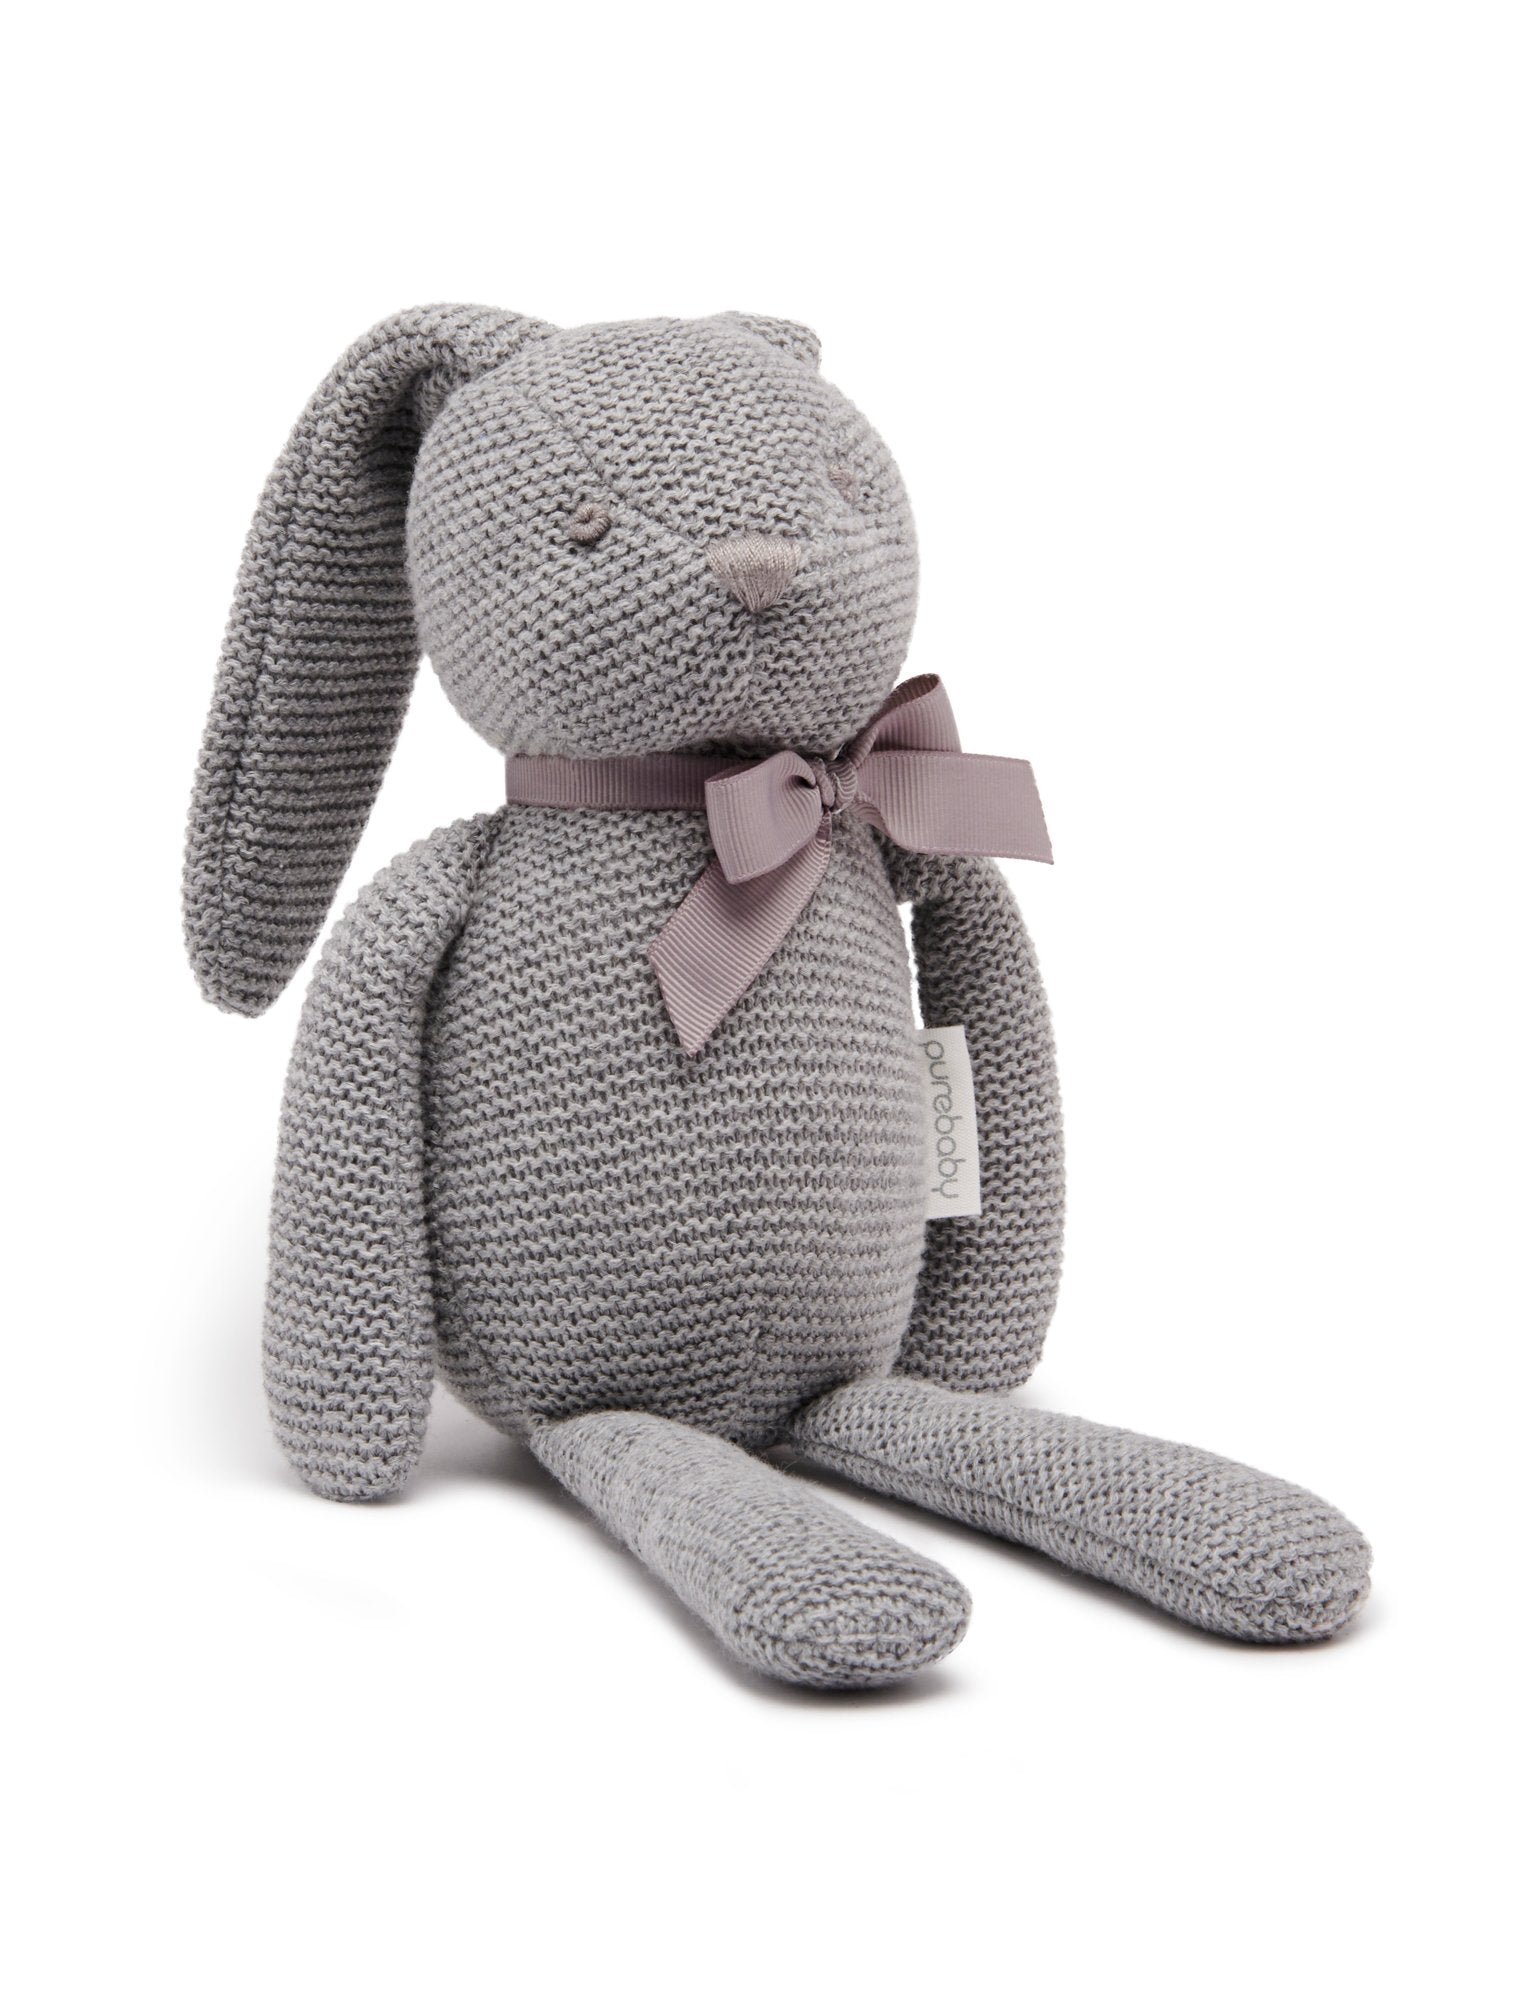 Knitted Bunny Toy